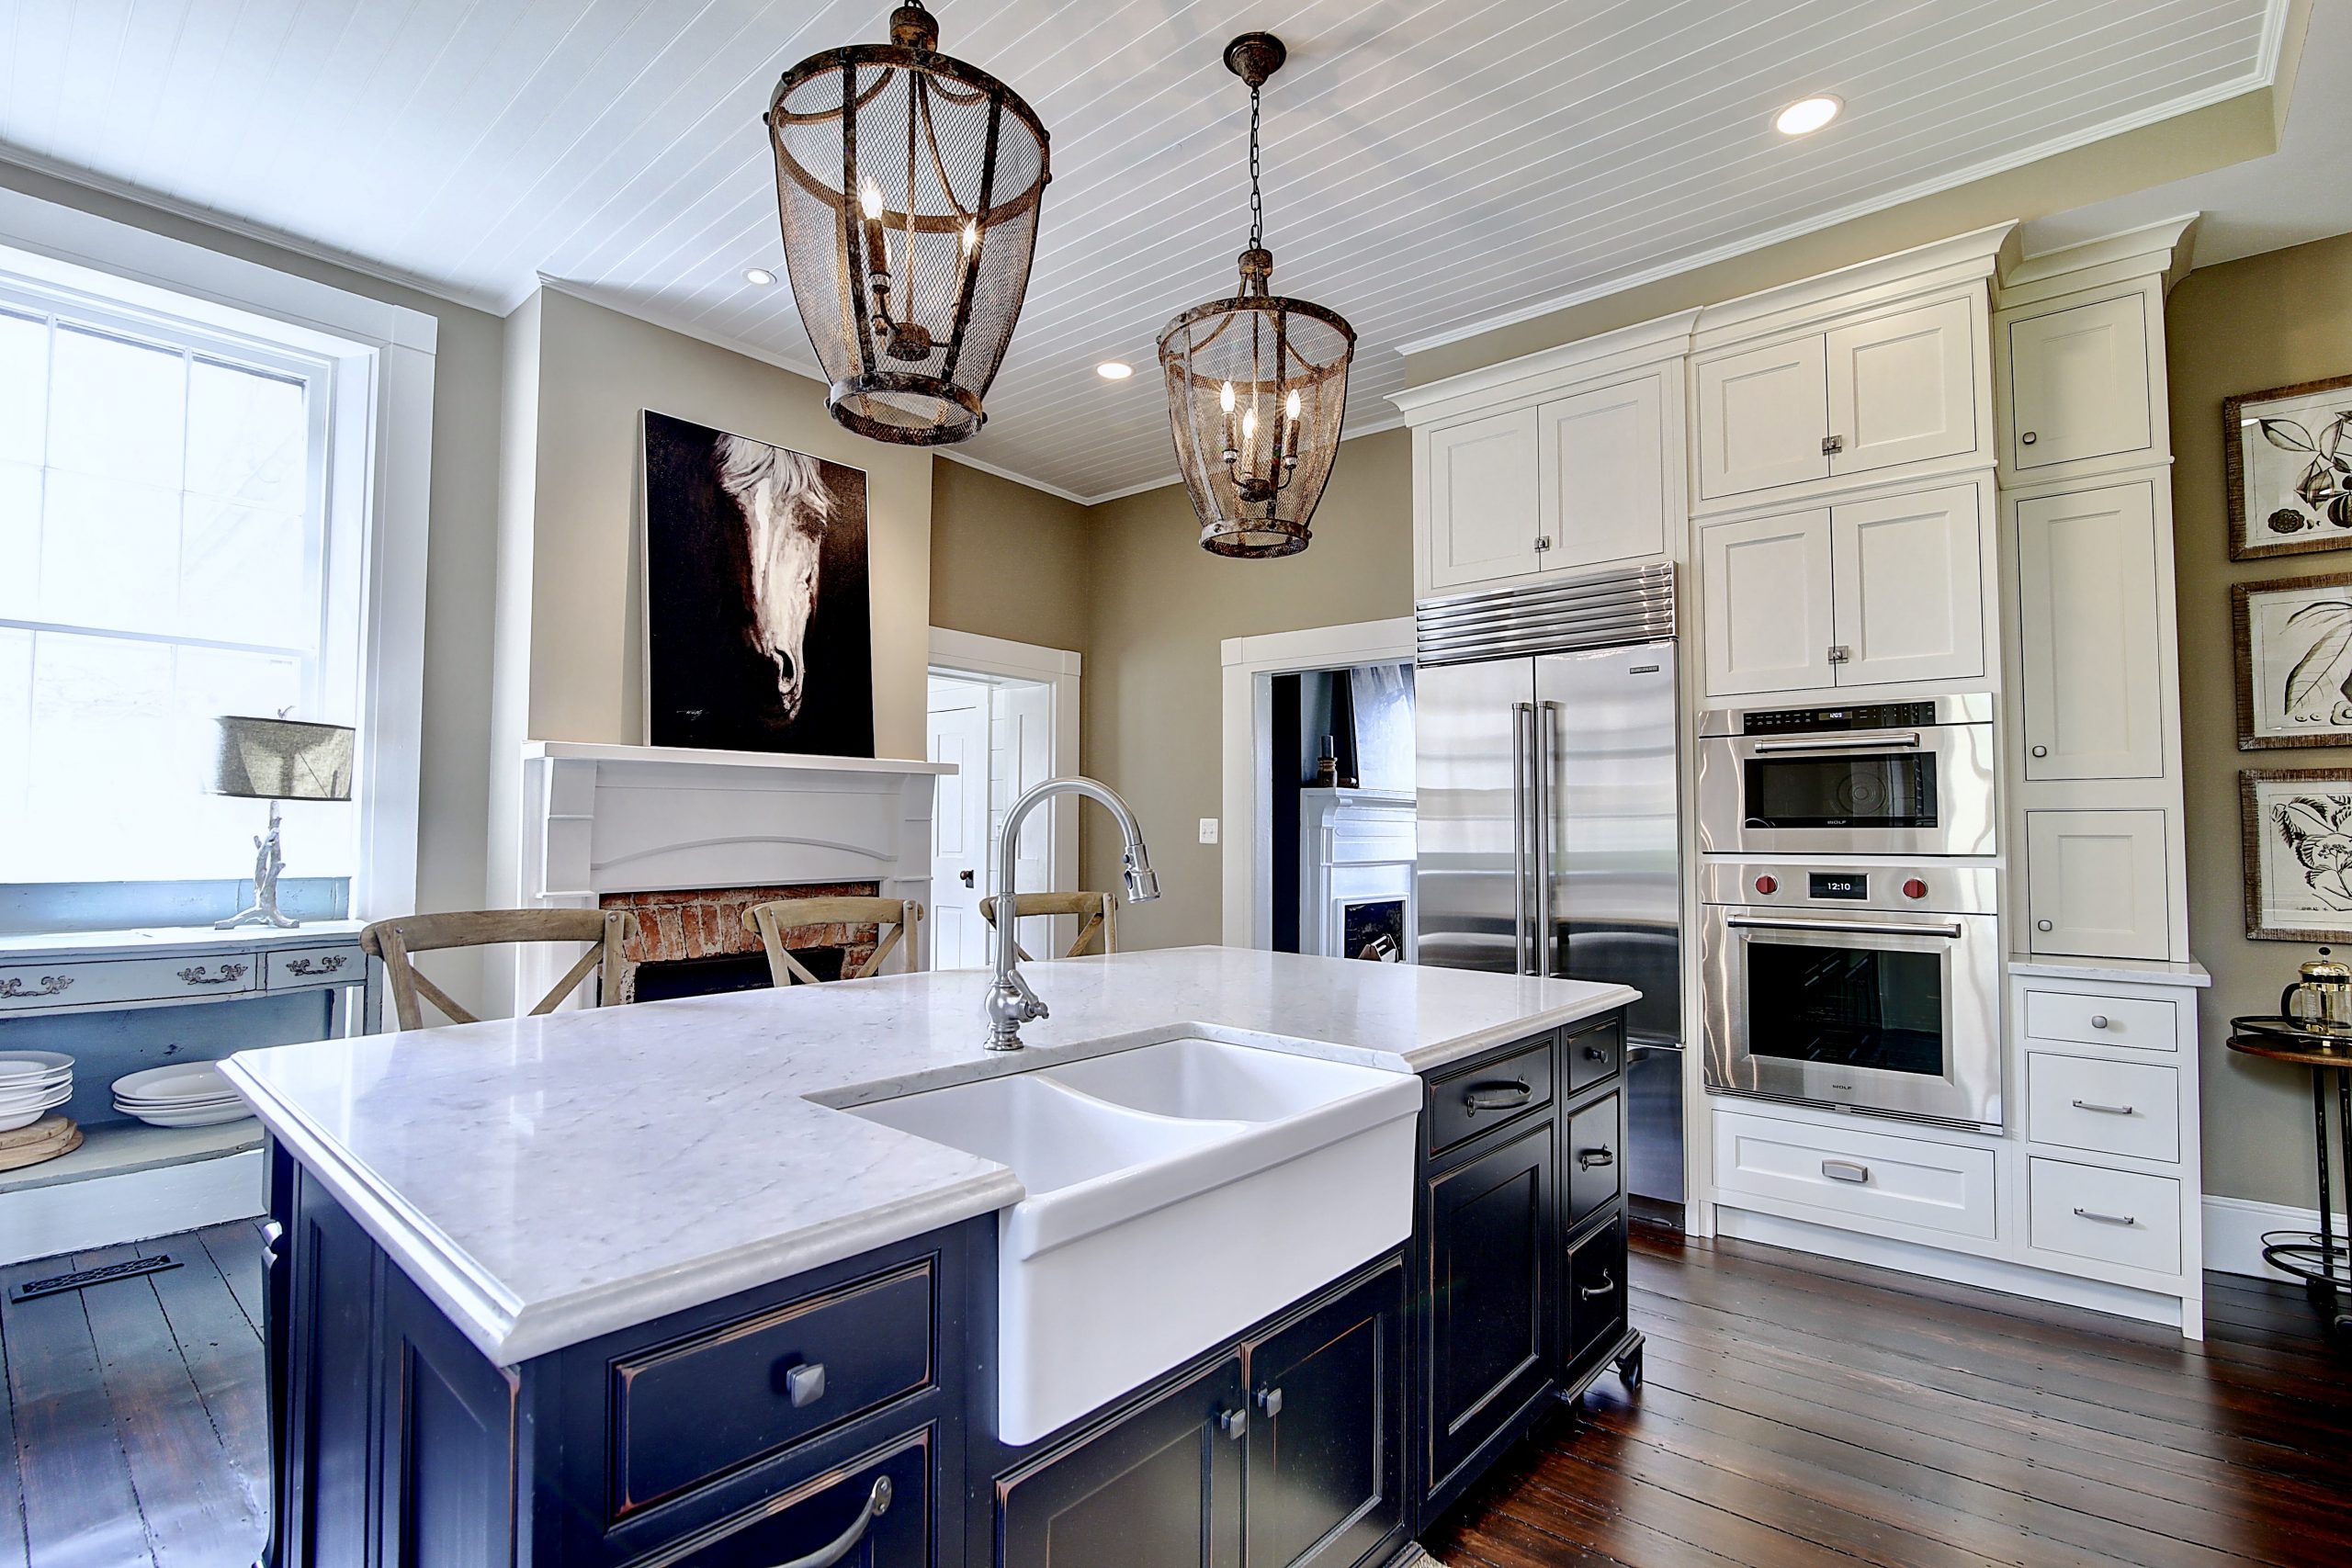 renovated kitchen with white cabinets and navy blue center island with white ceramic double sink